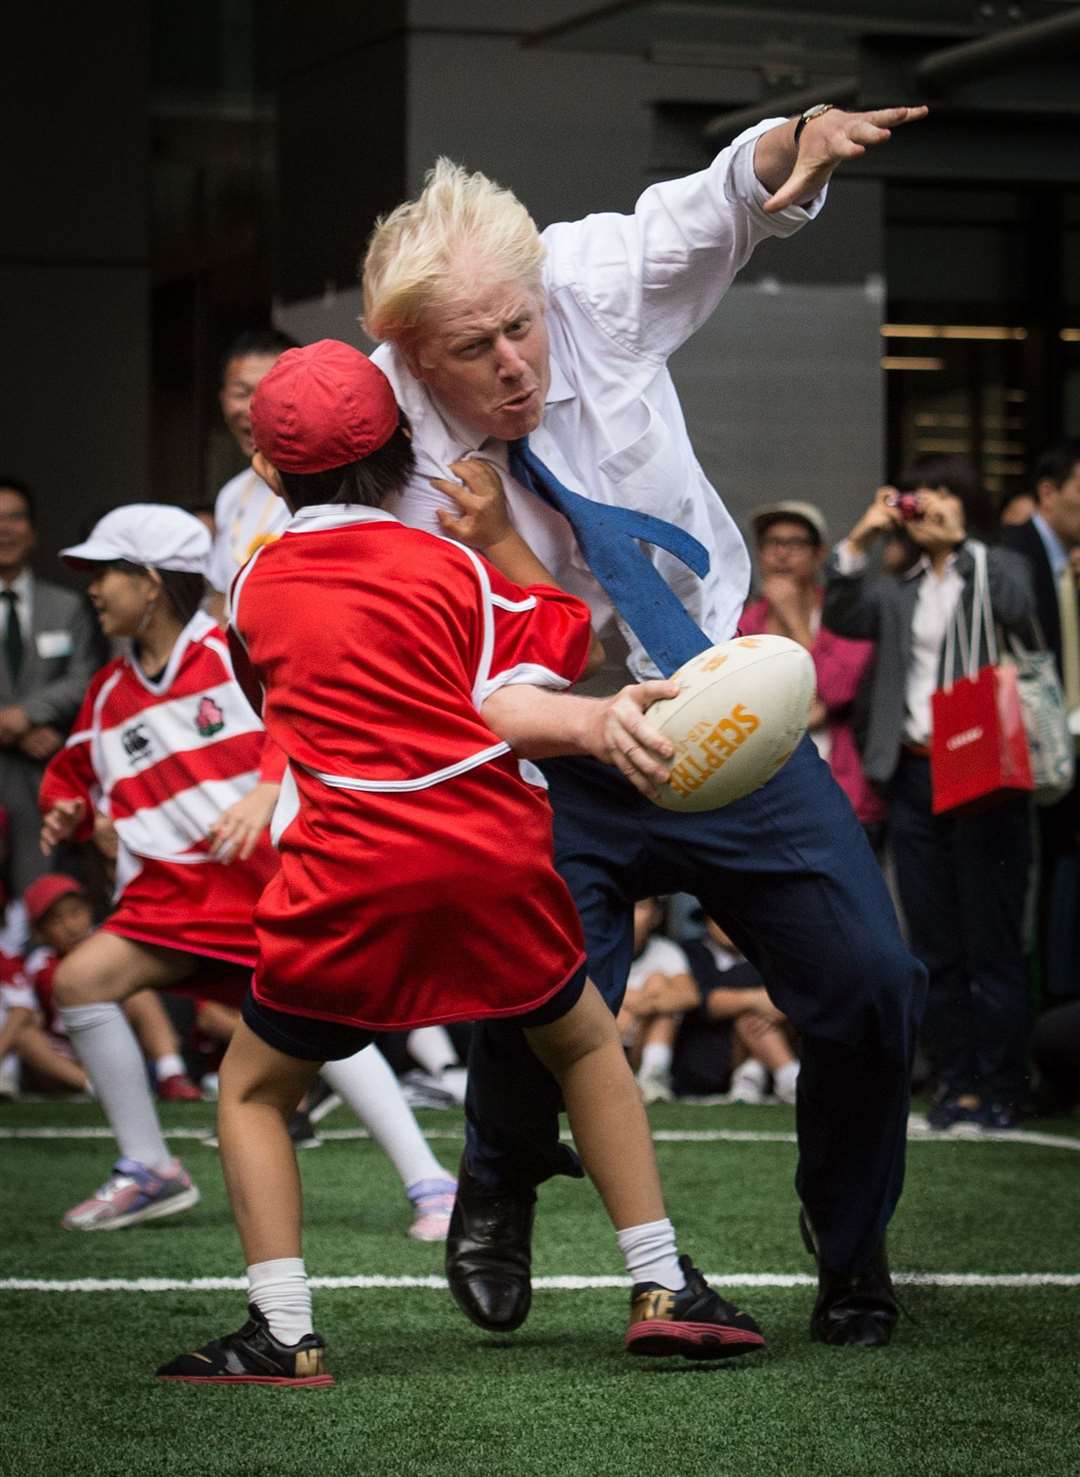 Giving no quarter, Mr Johnson joined a street rugby tournament in Tokyo during a visit in 2015 when he was mayor of London (Stefan Rousseau/PA)